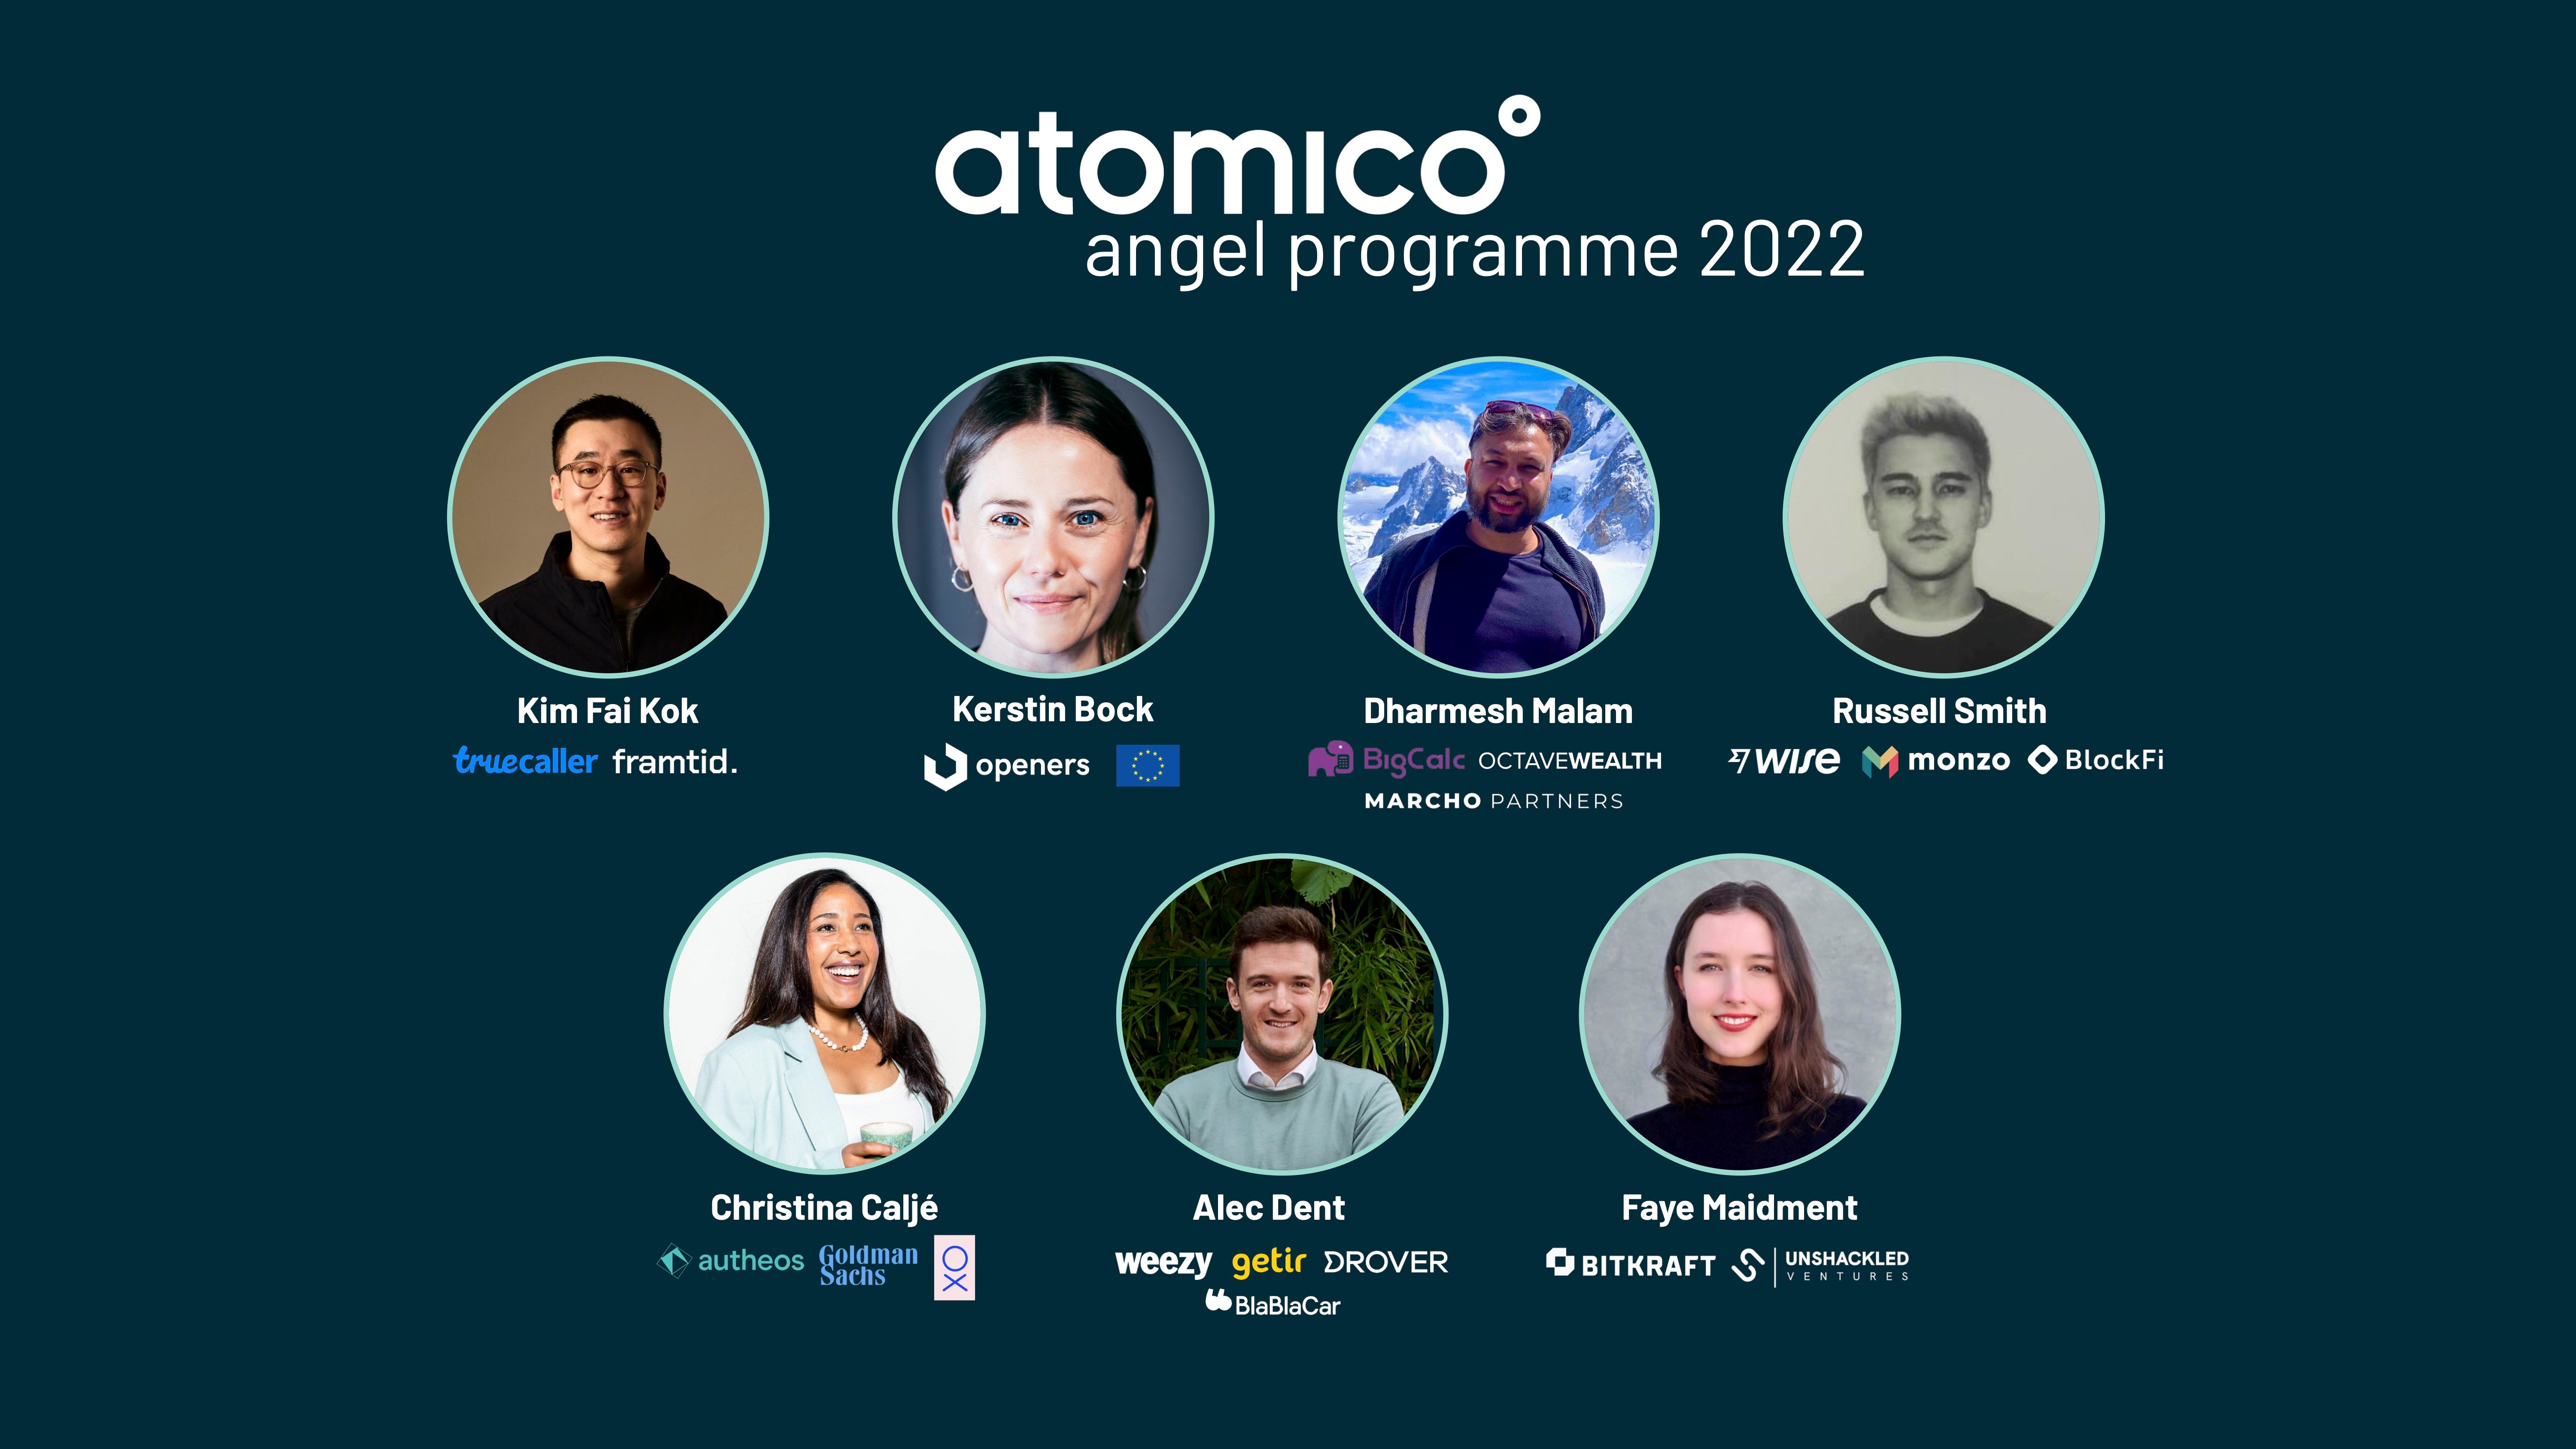 Welcoming seven new members to the Atomico Angel Programme